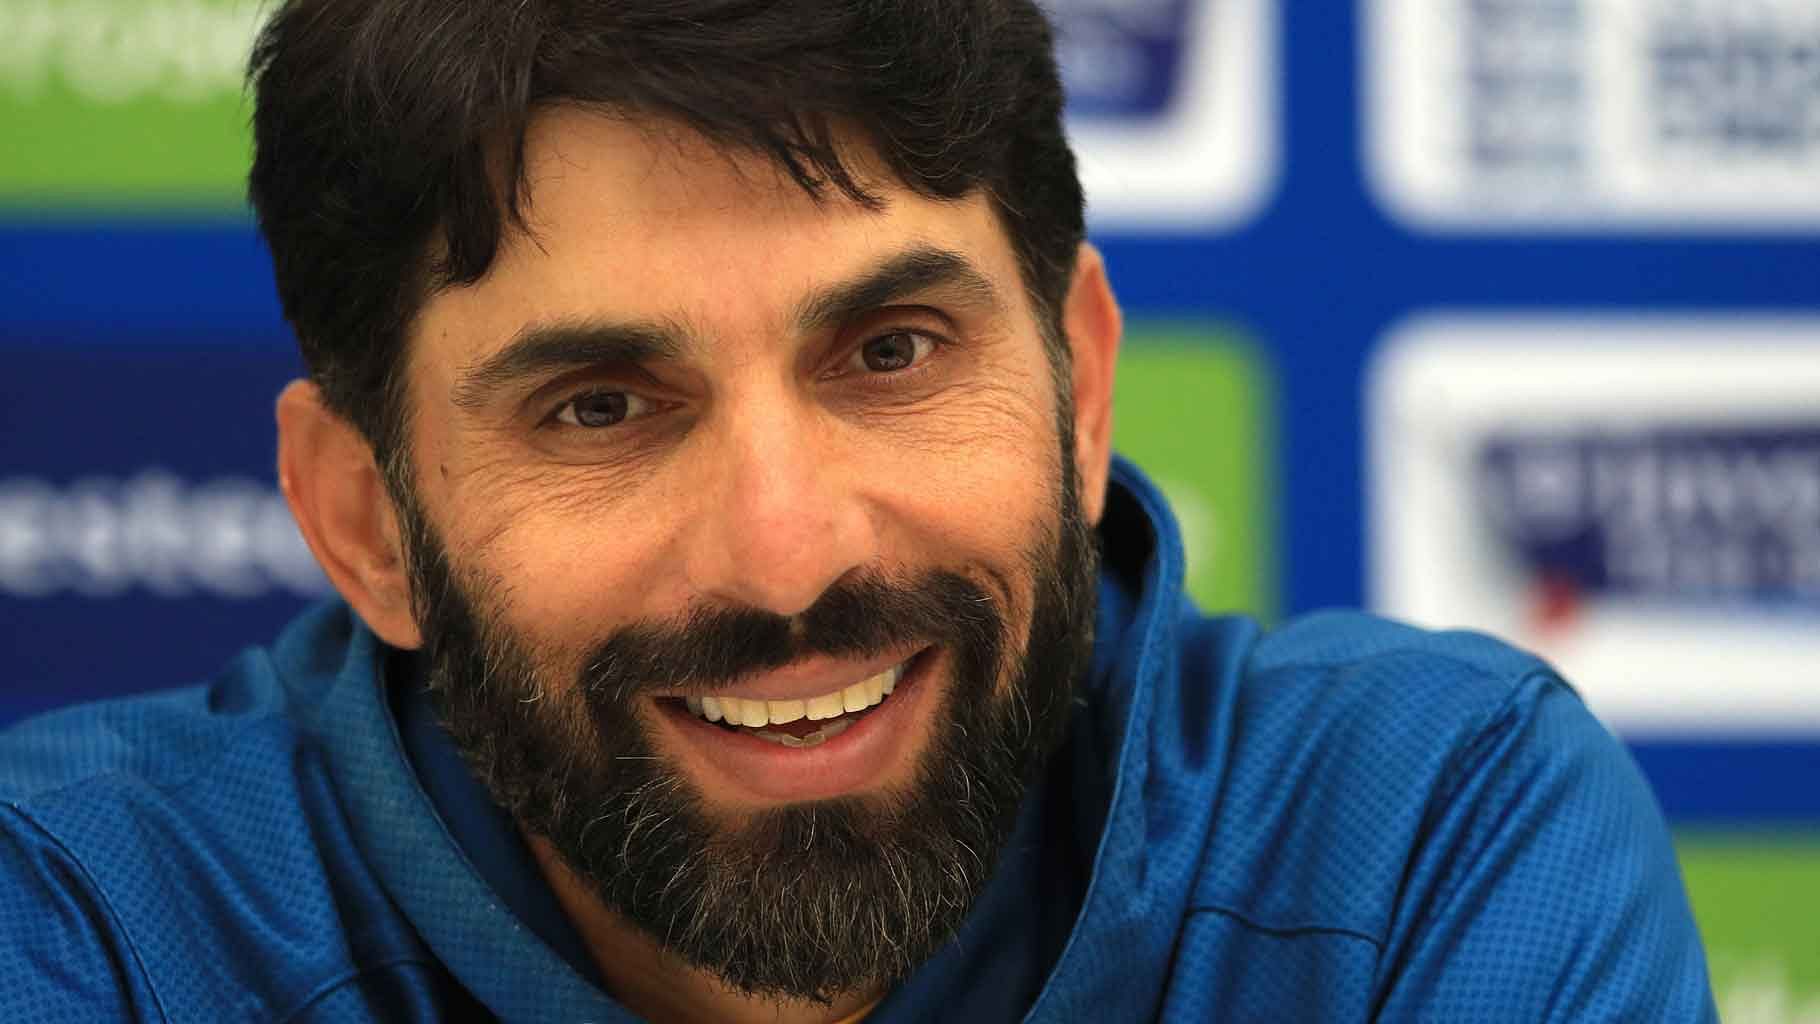 Head coach and chief selector Misbah-ul-Haq on Tuesday, 4 February outlined his selection policy and plans for the next six months before Pakistan Cricket Board’s Board of Governors (BOG) during a meeting.